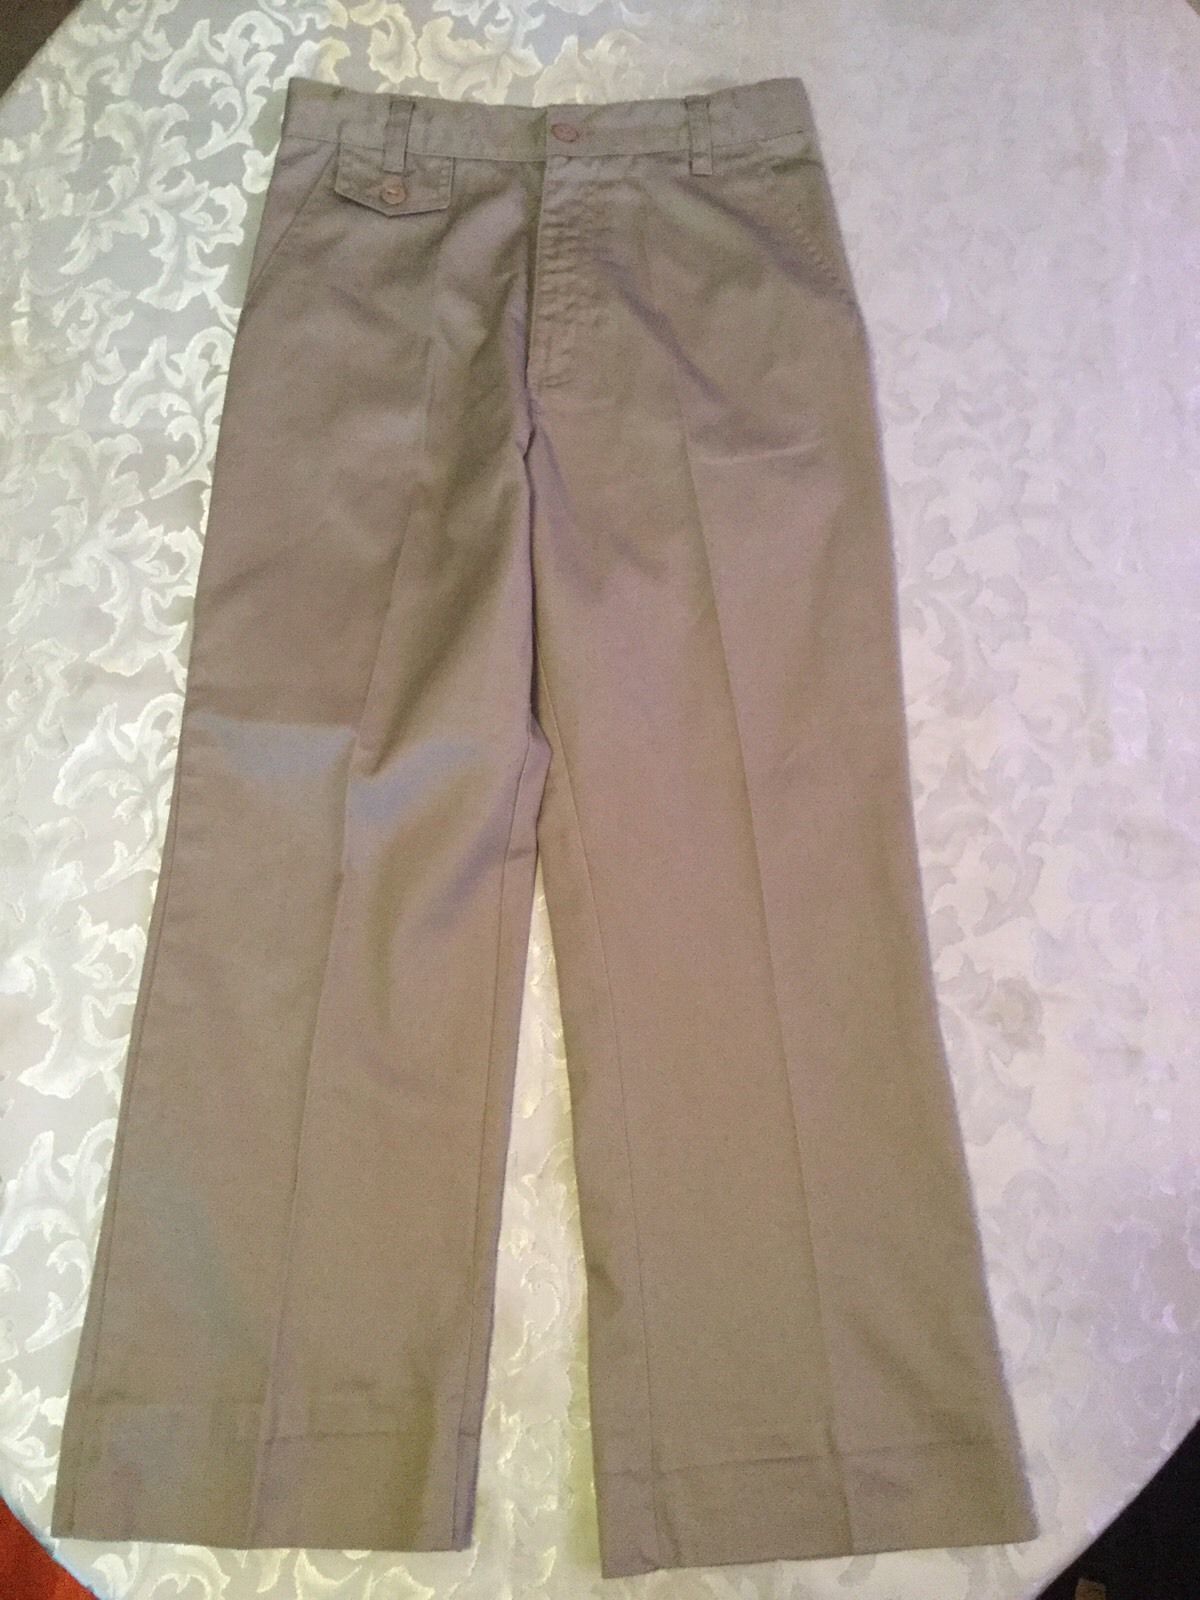 Girls-Size 12-Beverly Hills Polo Club/uniform-khaki pants-Great for ...